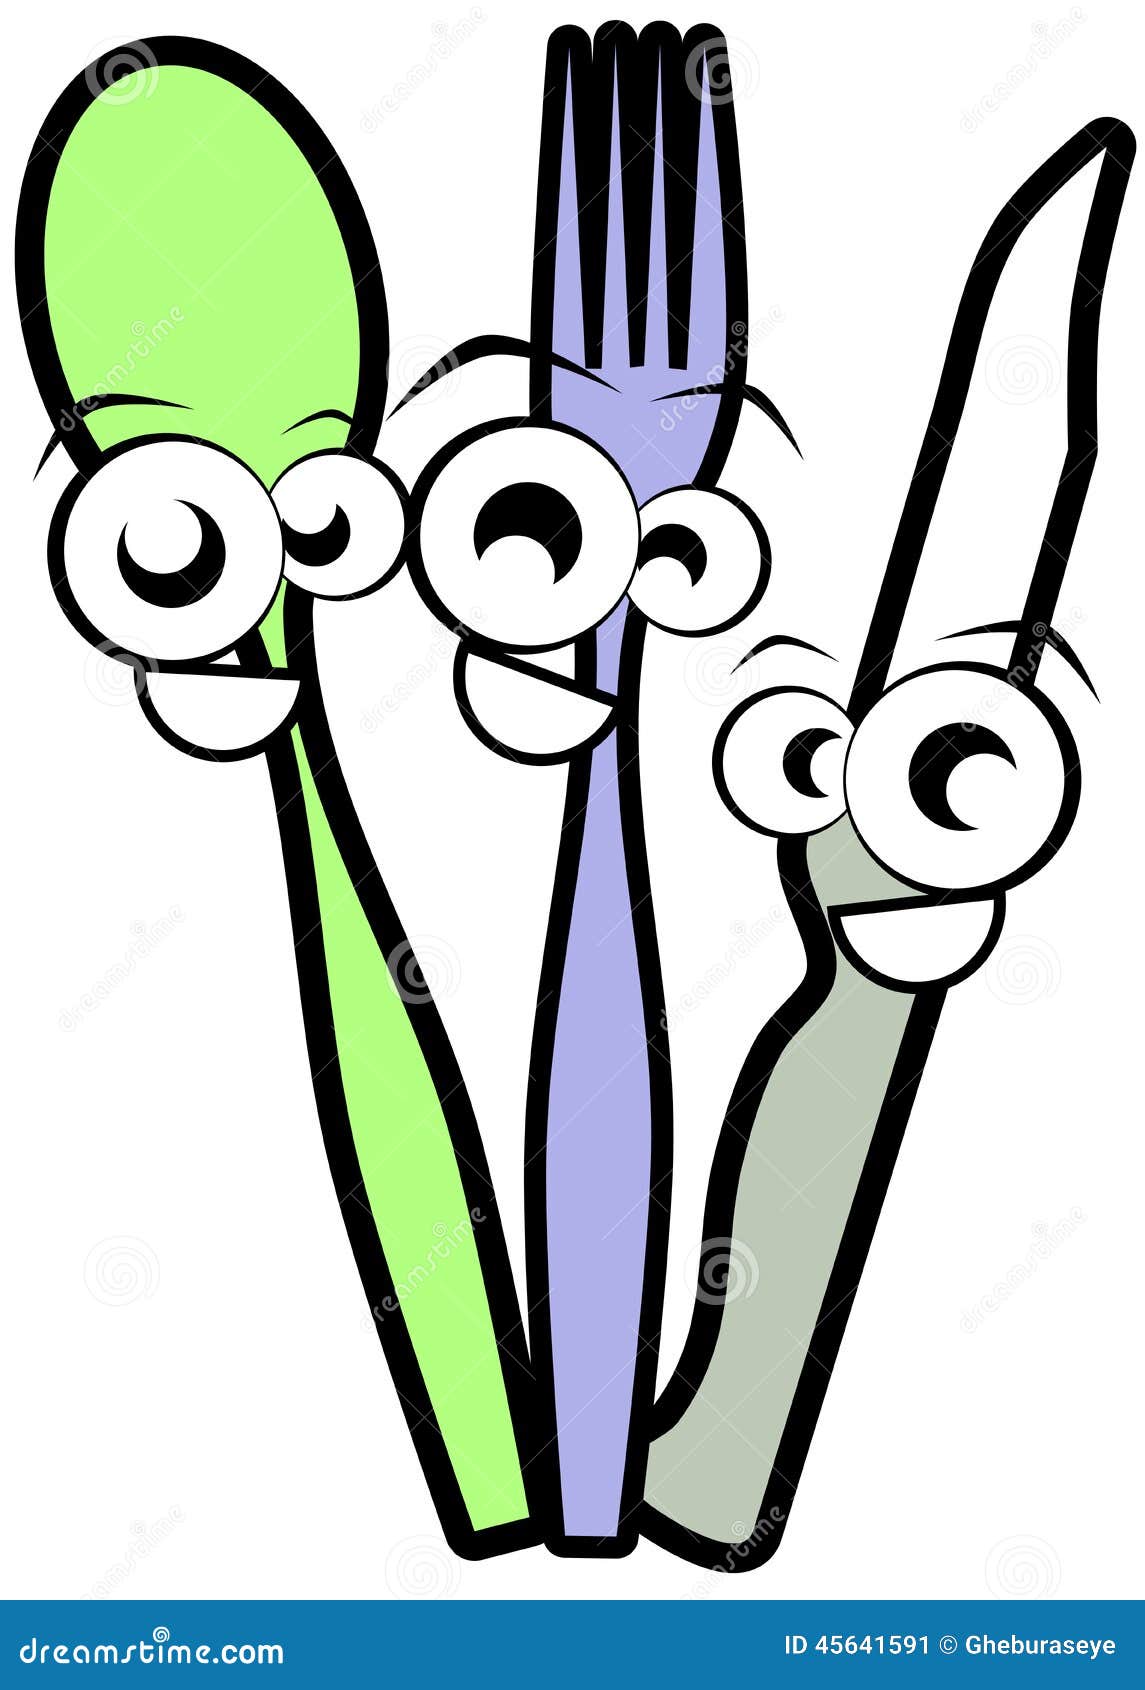 cutlery cartoon isolated image representing kitchen equipment version 45641591